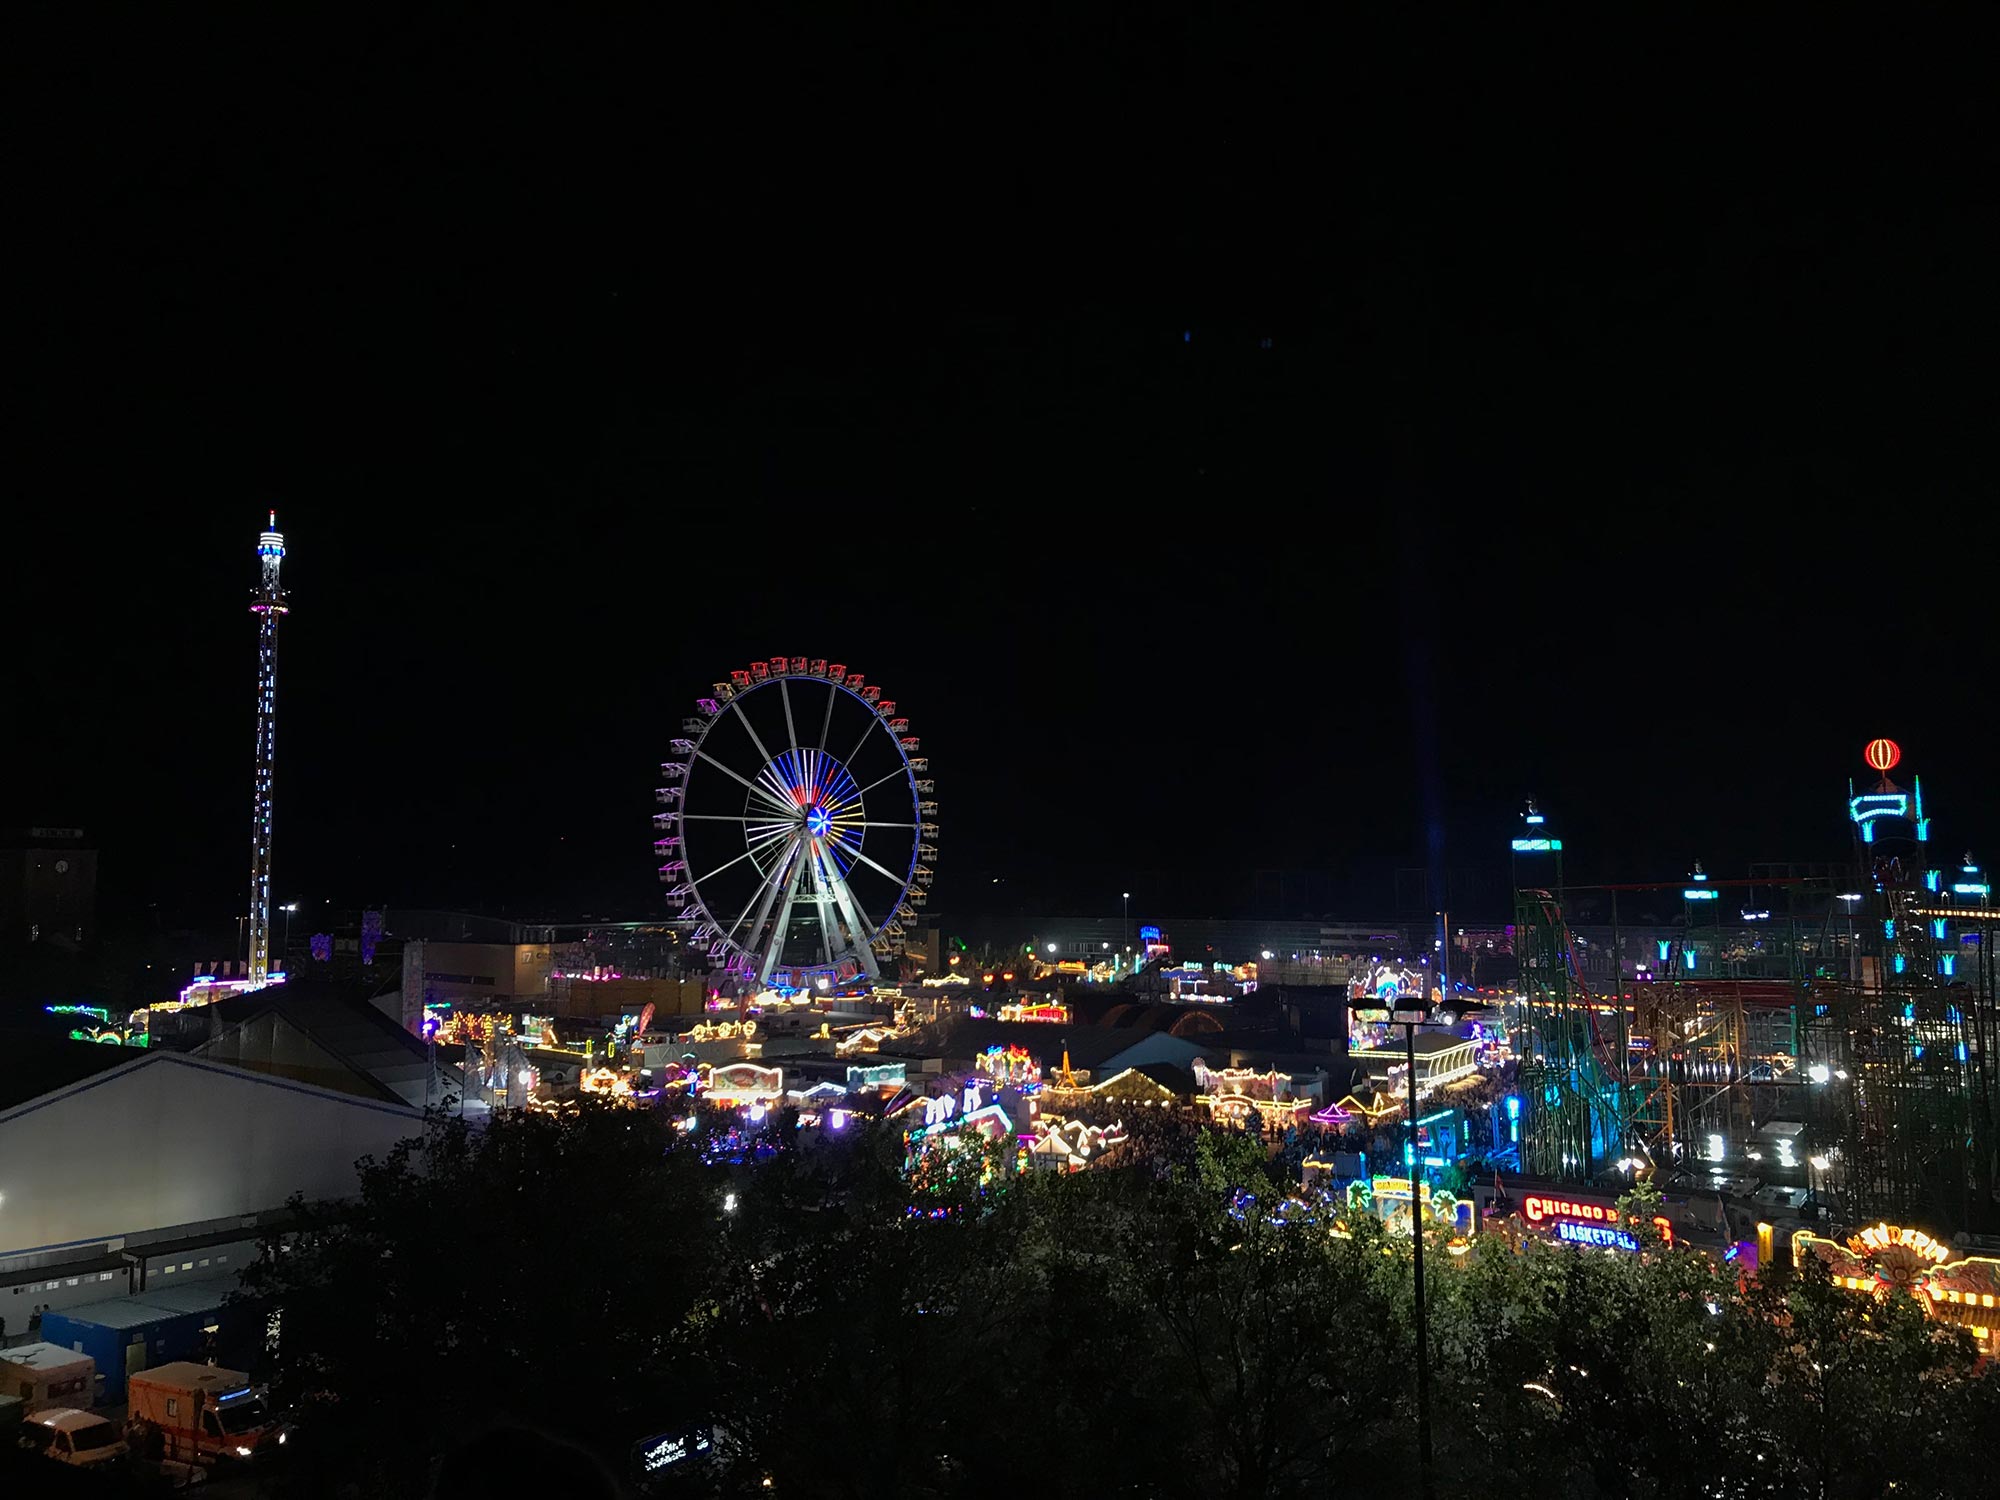 A fairground in Bremen City by night with many lights coming from the giant wheel